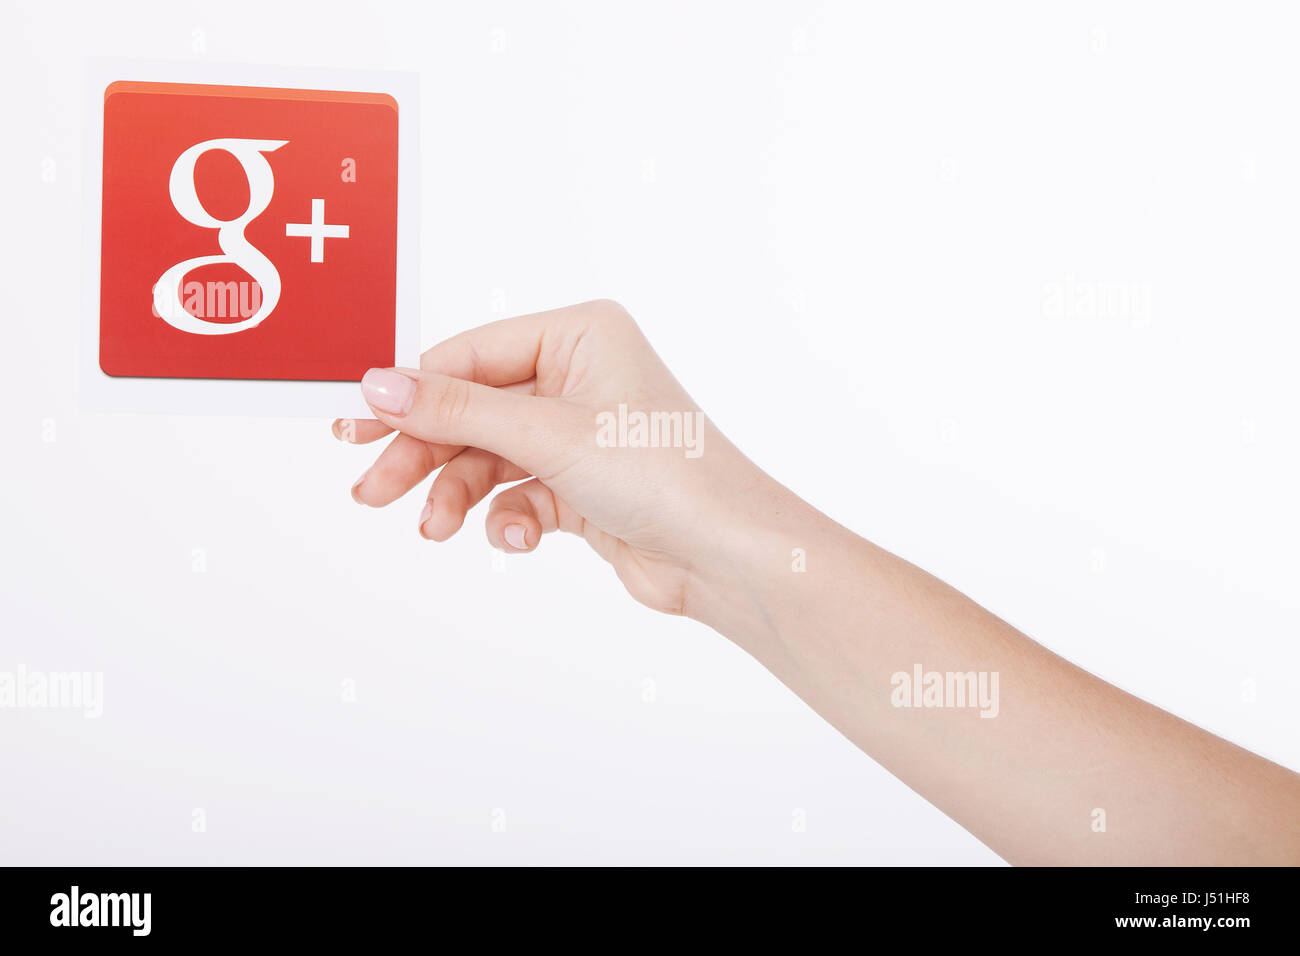 Kiev, Ukraine - August 22, 2016: Woman hands holding Google plus icon printed on paper on grey background.Google is USA multinational corporation. Stock Photo